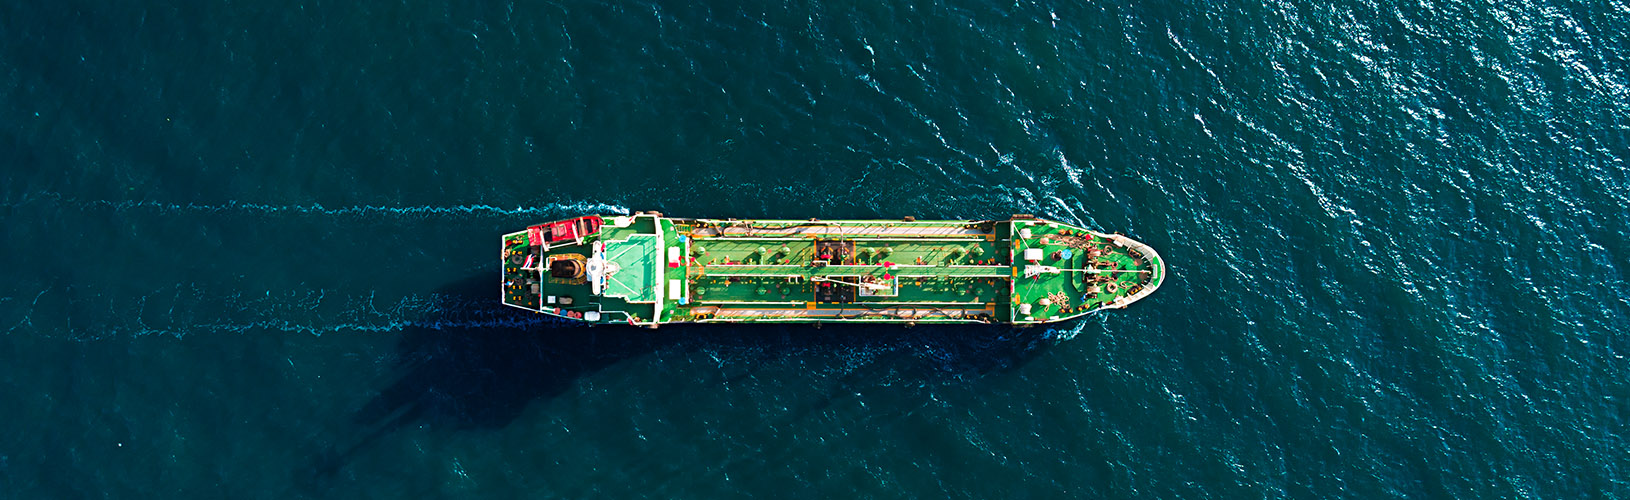 A large ship at sea, representing the costs of not implementing proper CDP reporting procedures.